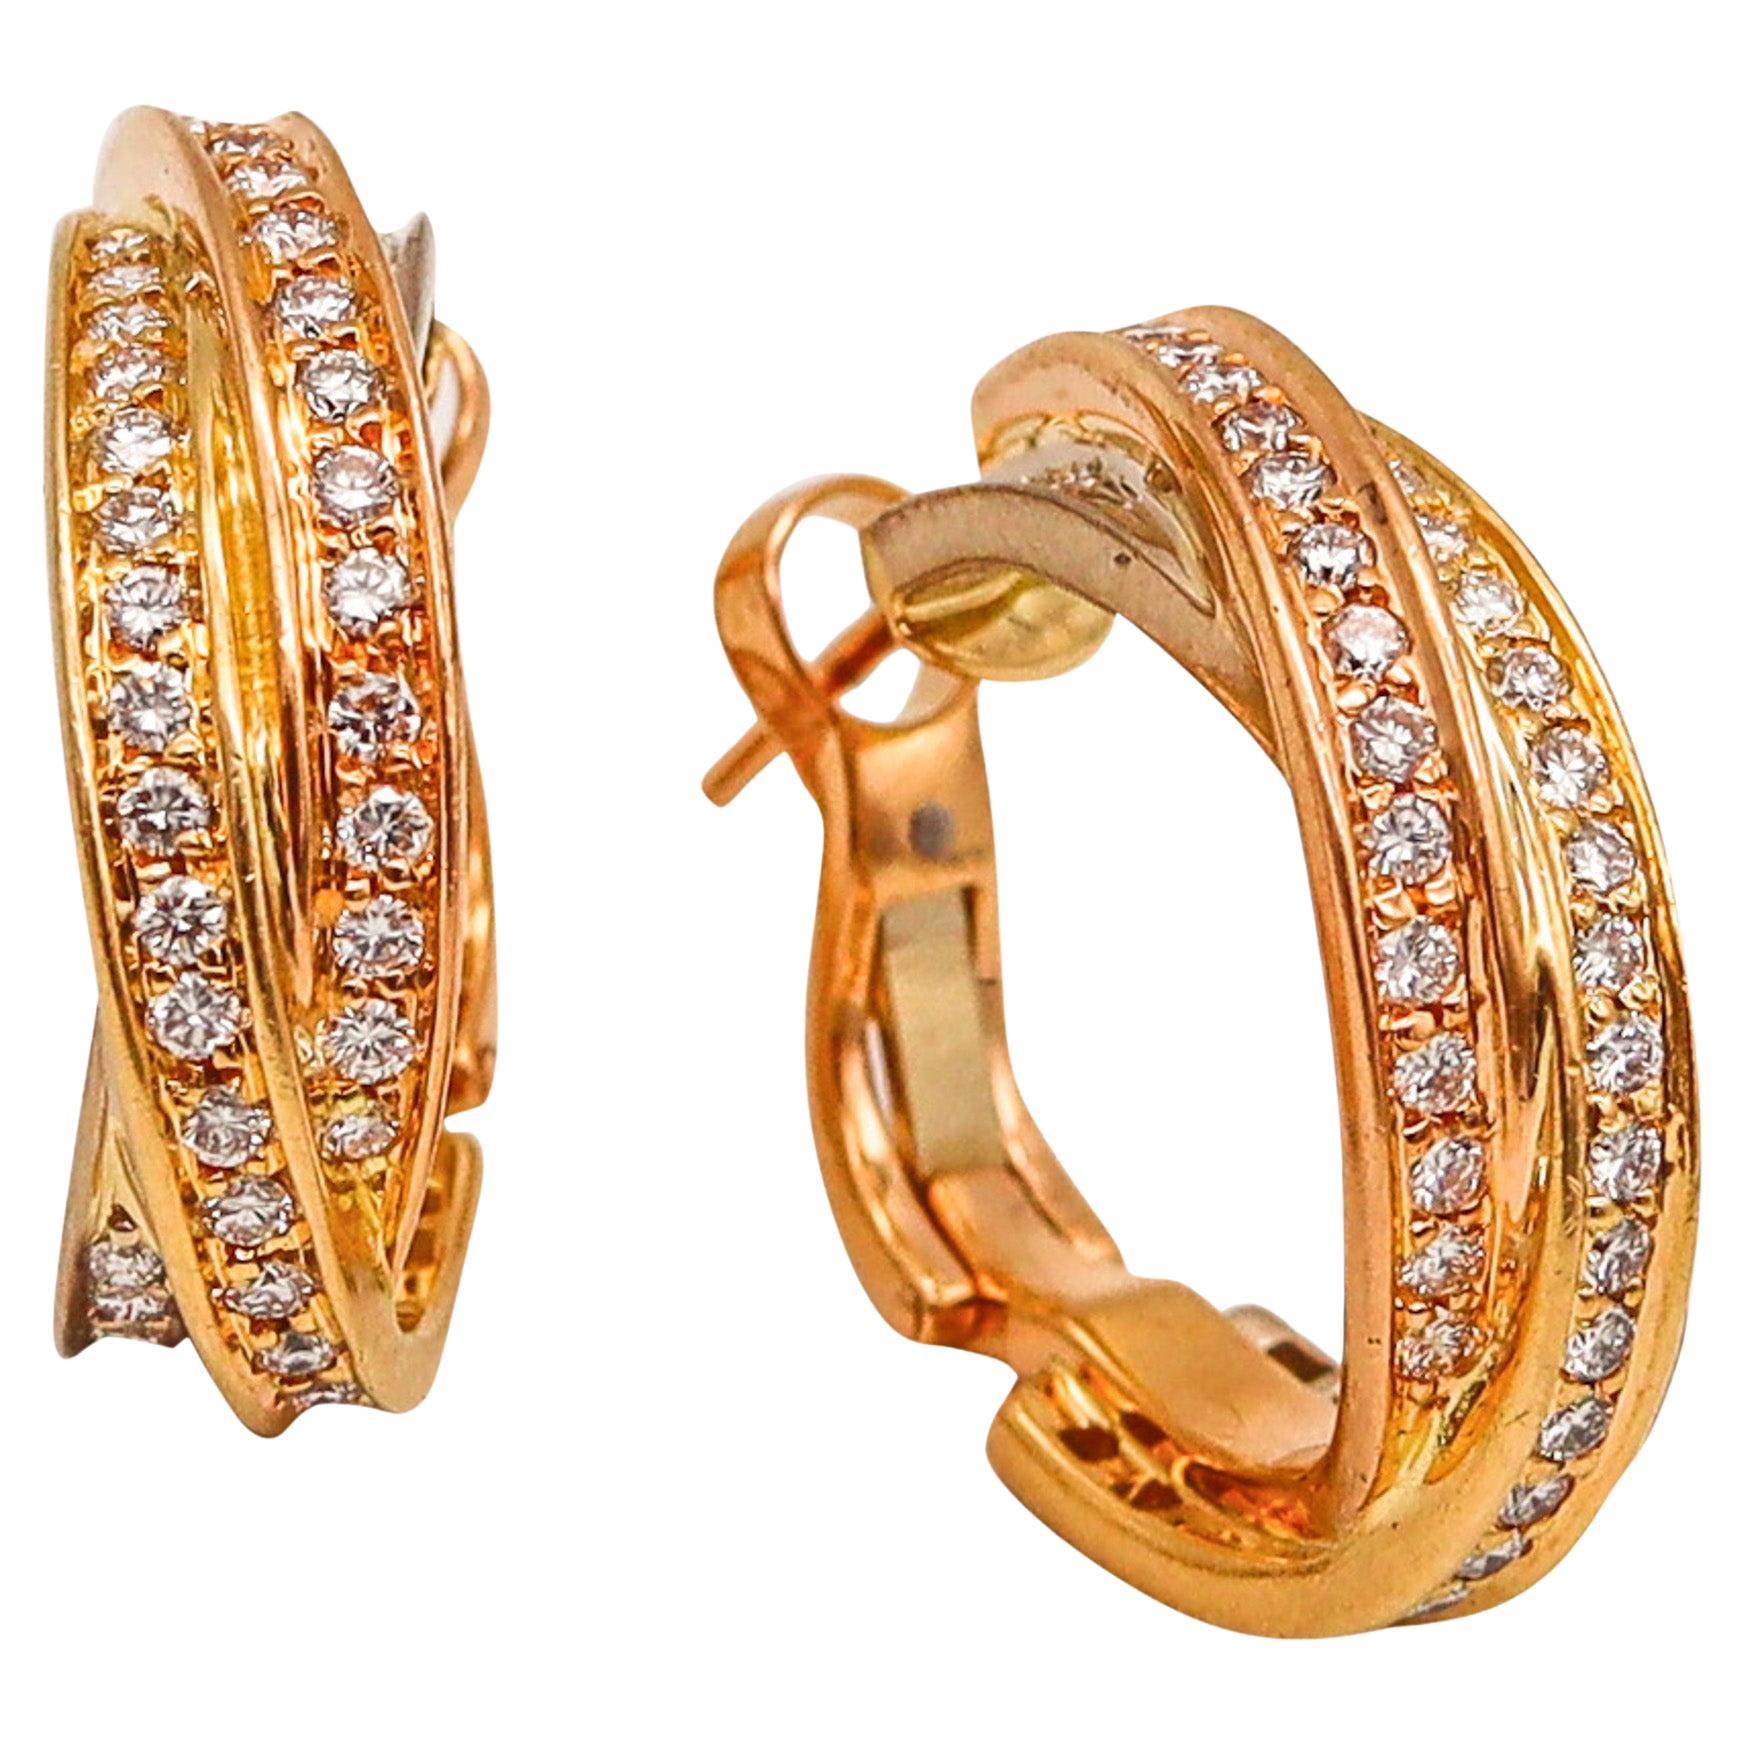 Cartier Paris Trinity Earrings In 18Kt Yellow Gold With 2.07 Ctw In Diamonds